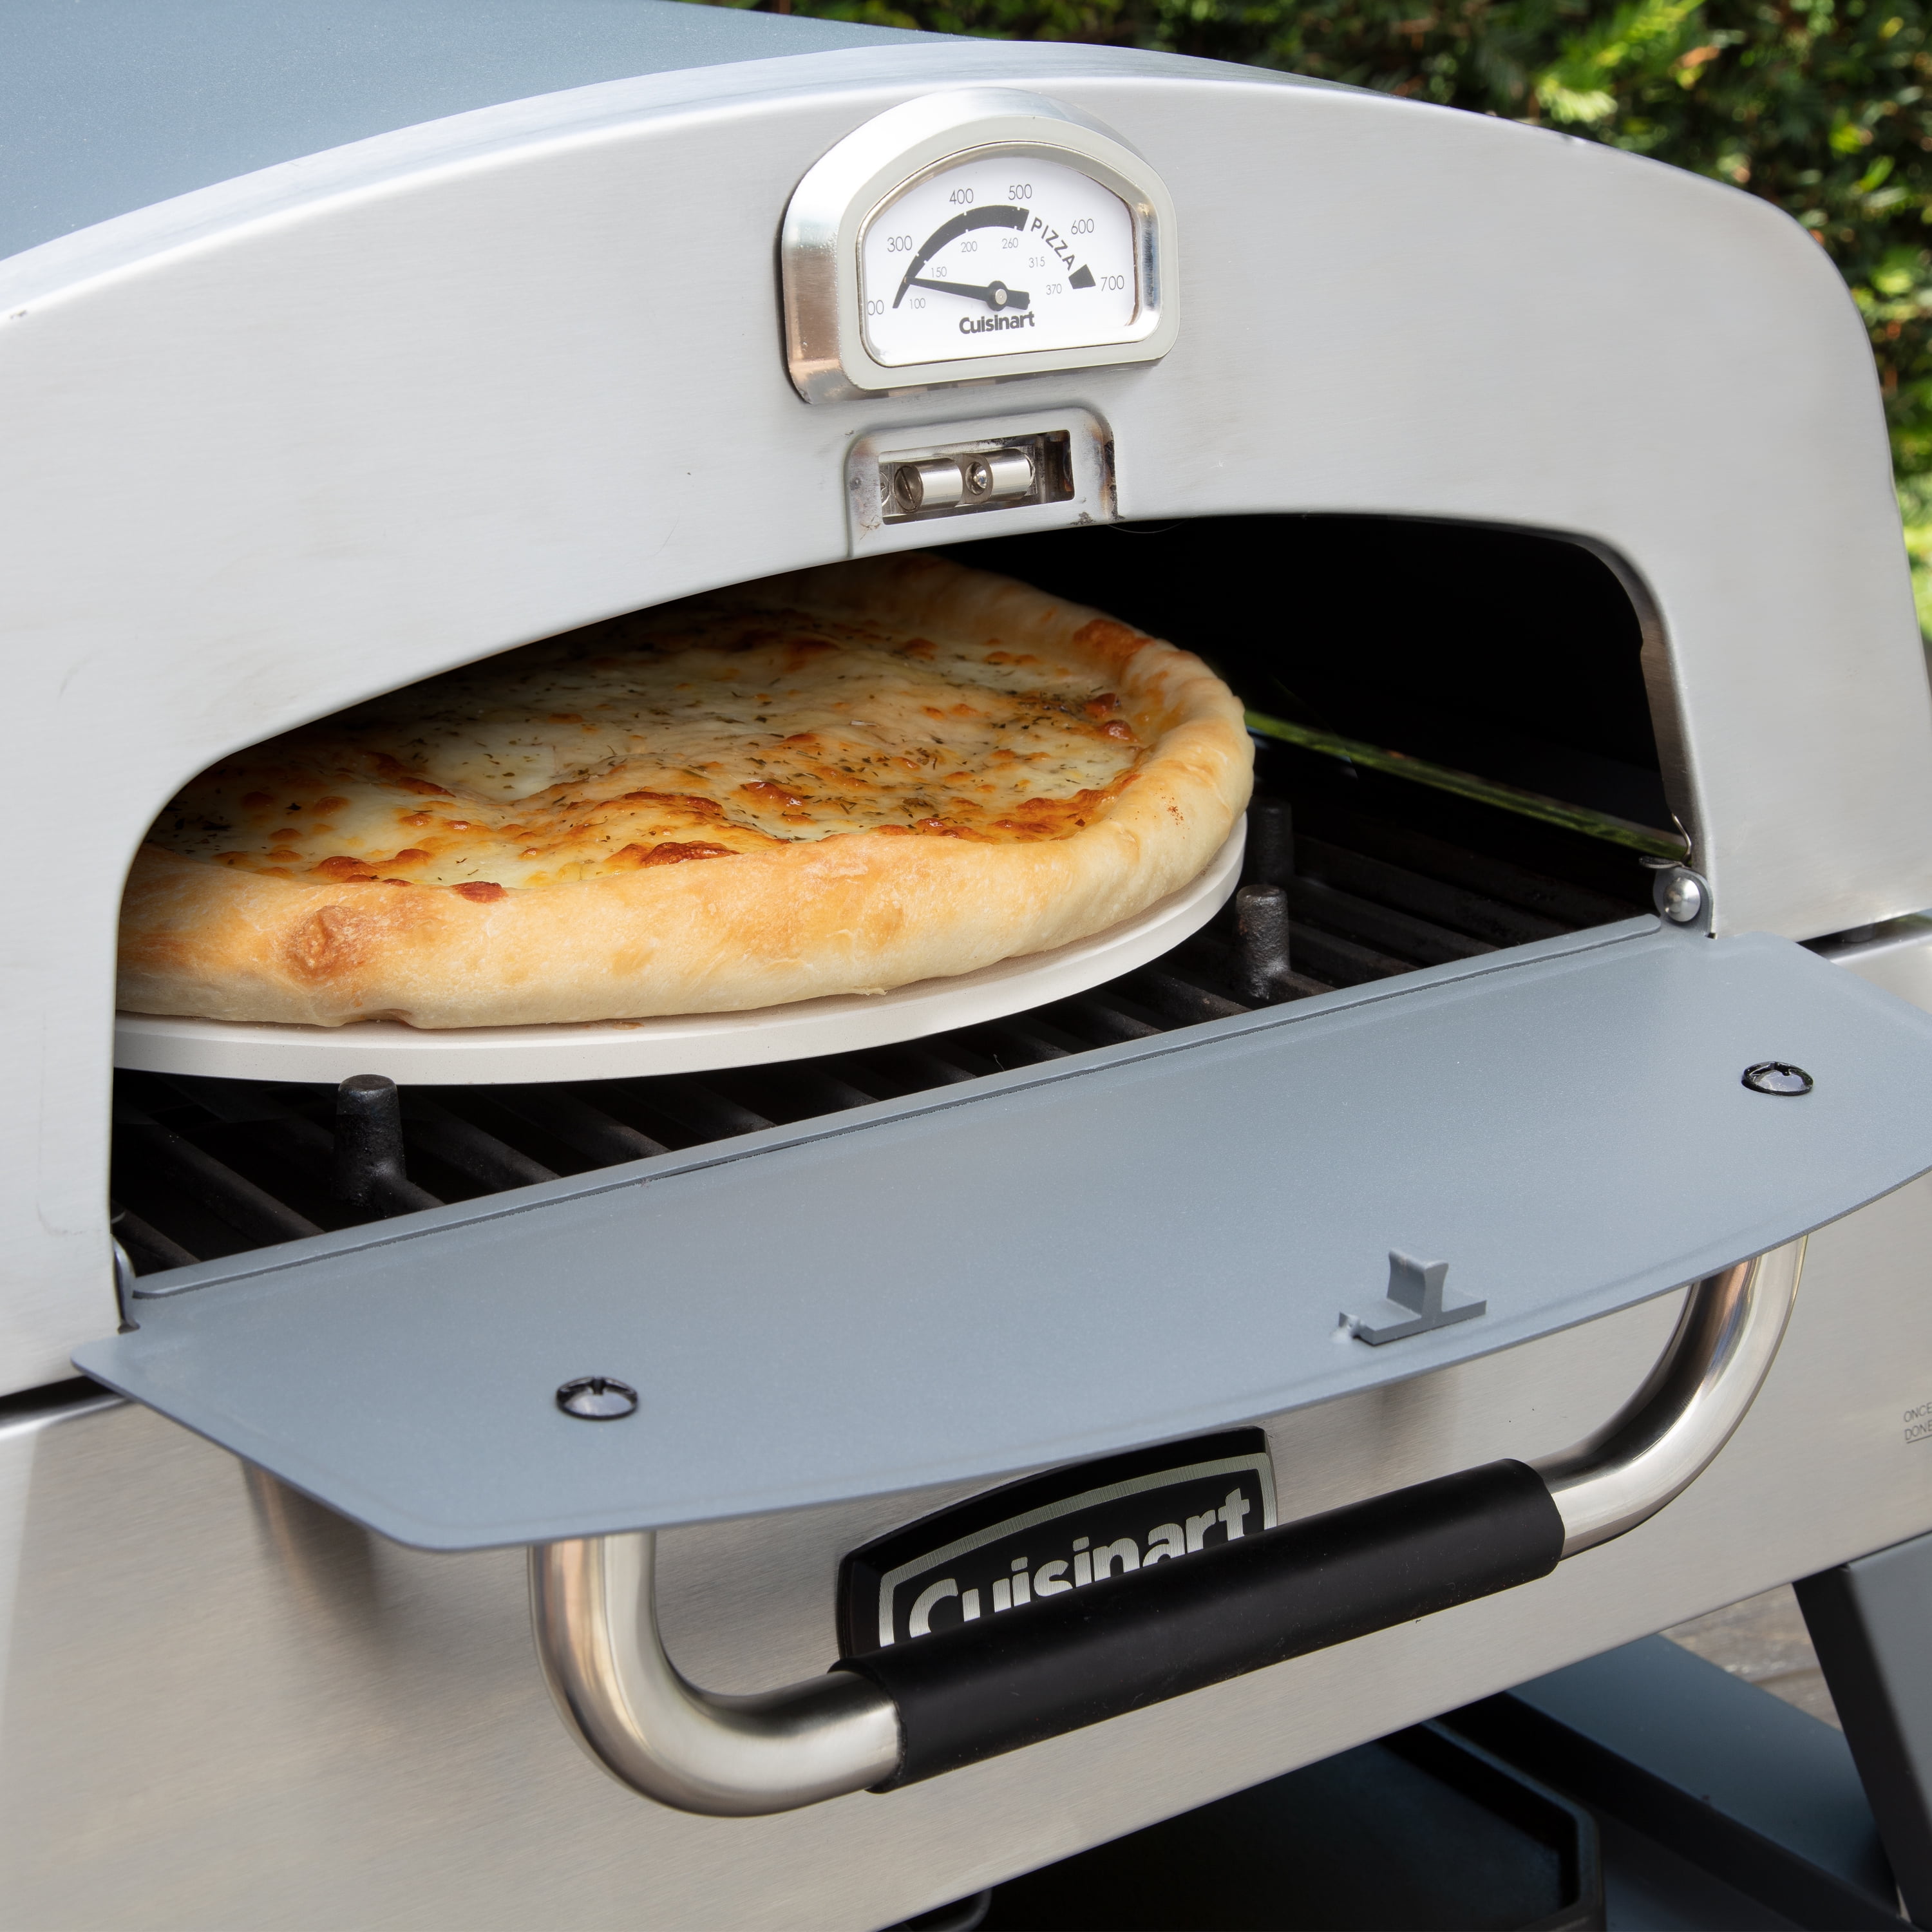 Snor Informeer temperament Cuisinart 3-in-1 Pizza Oven, Griddle, and Grill - Walmart.com